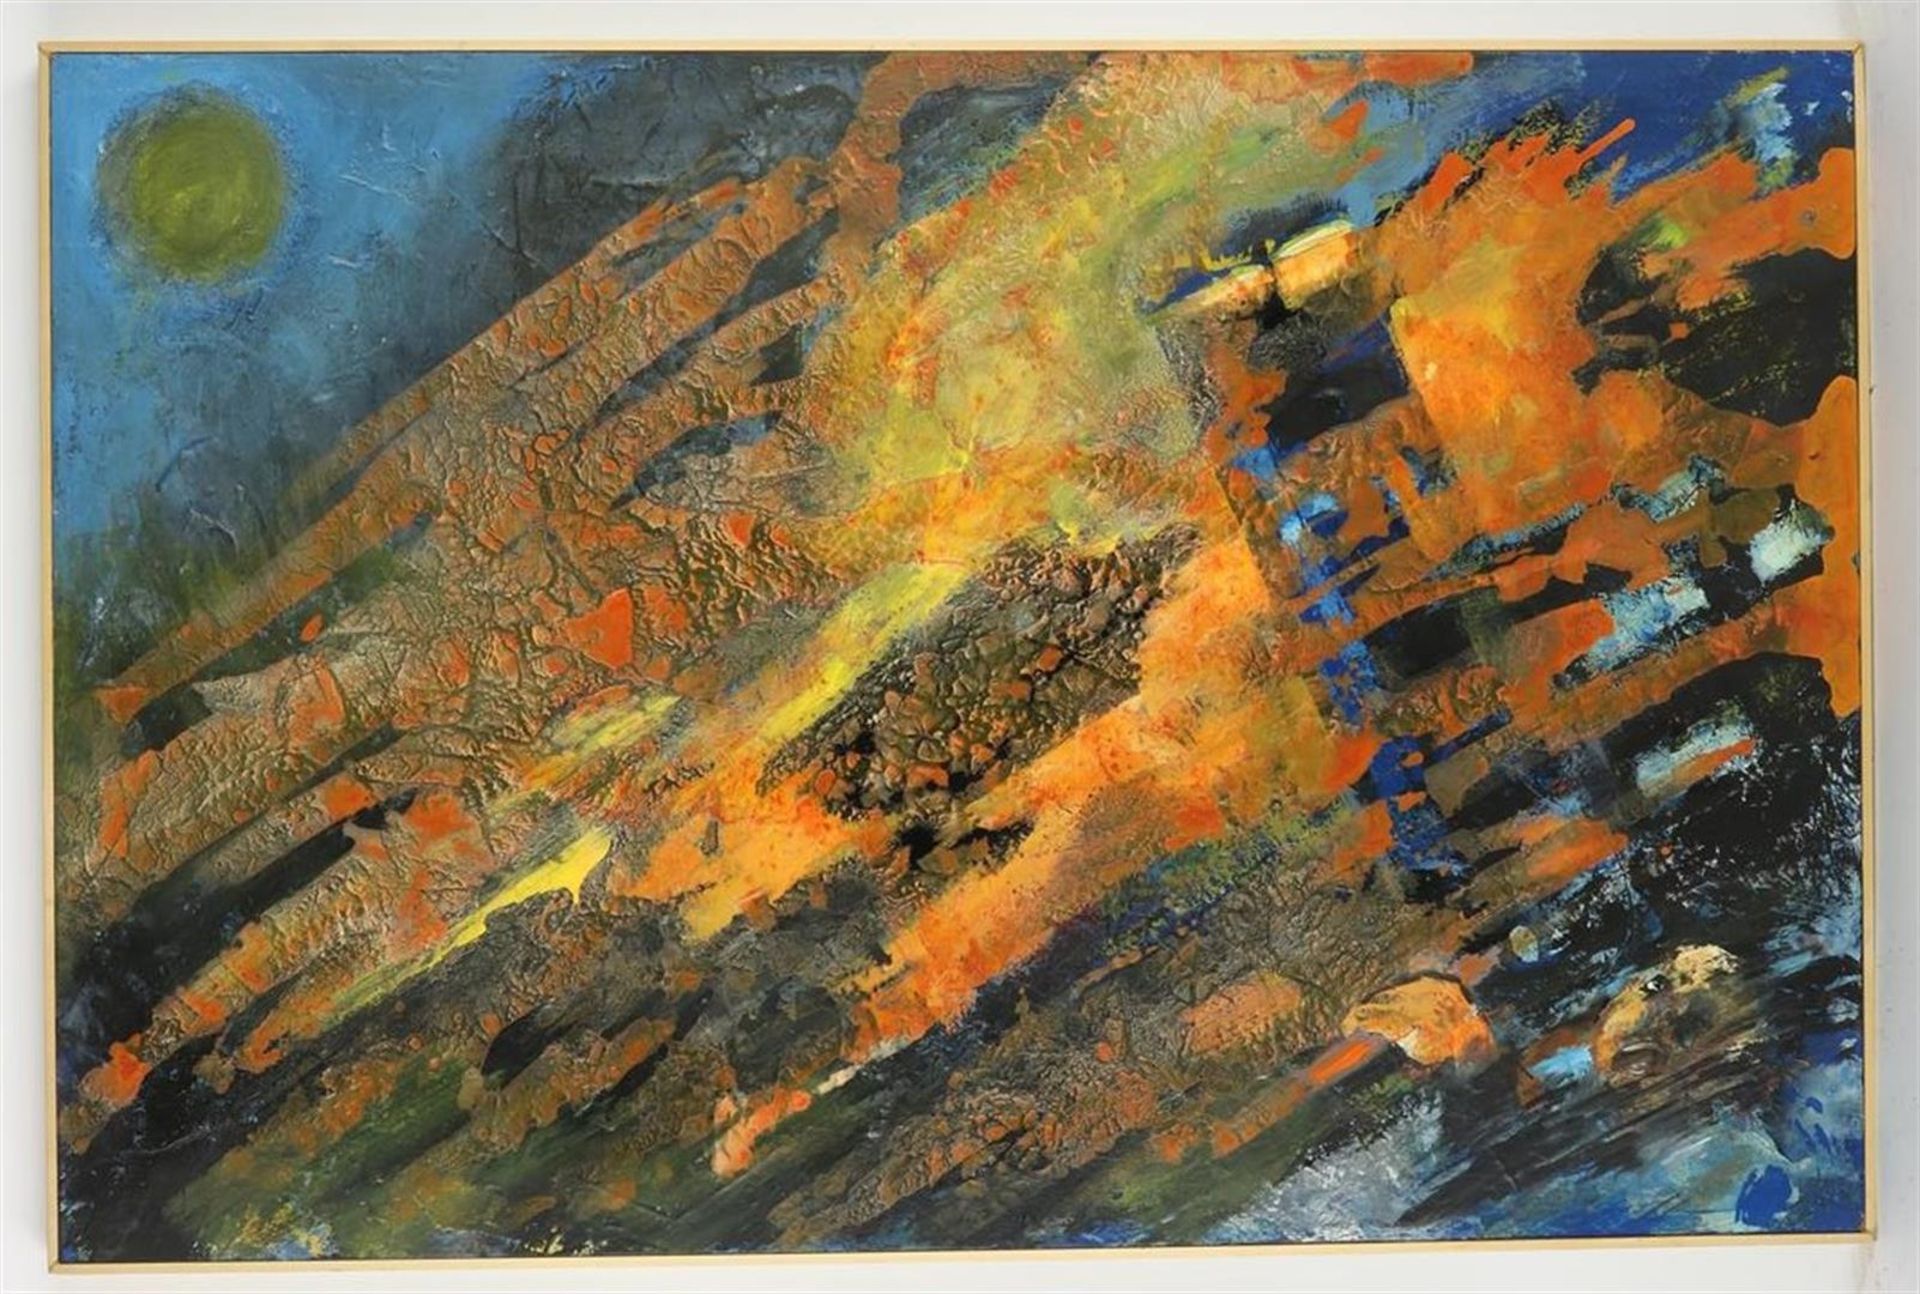 Ninke Kast (1926-2022) 'Shipwreck', signed and dated 2000 on the reverse, board 80 x 120 cm. - Image 2 of 3